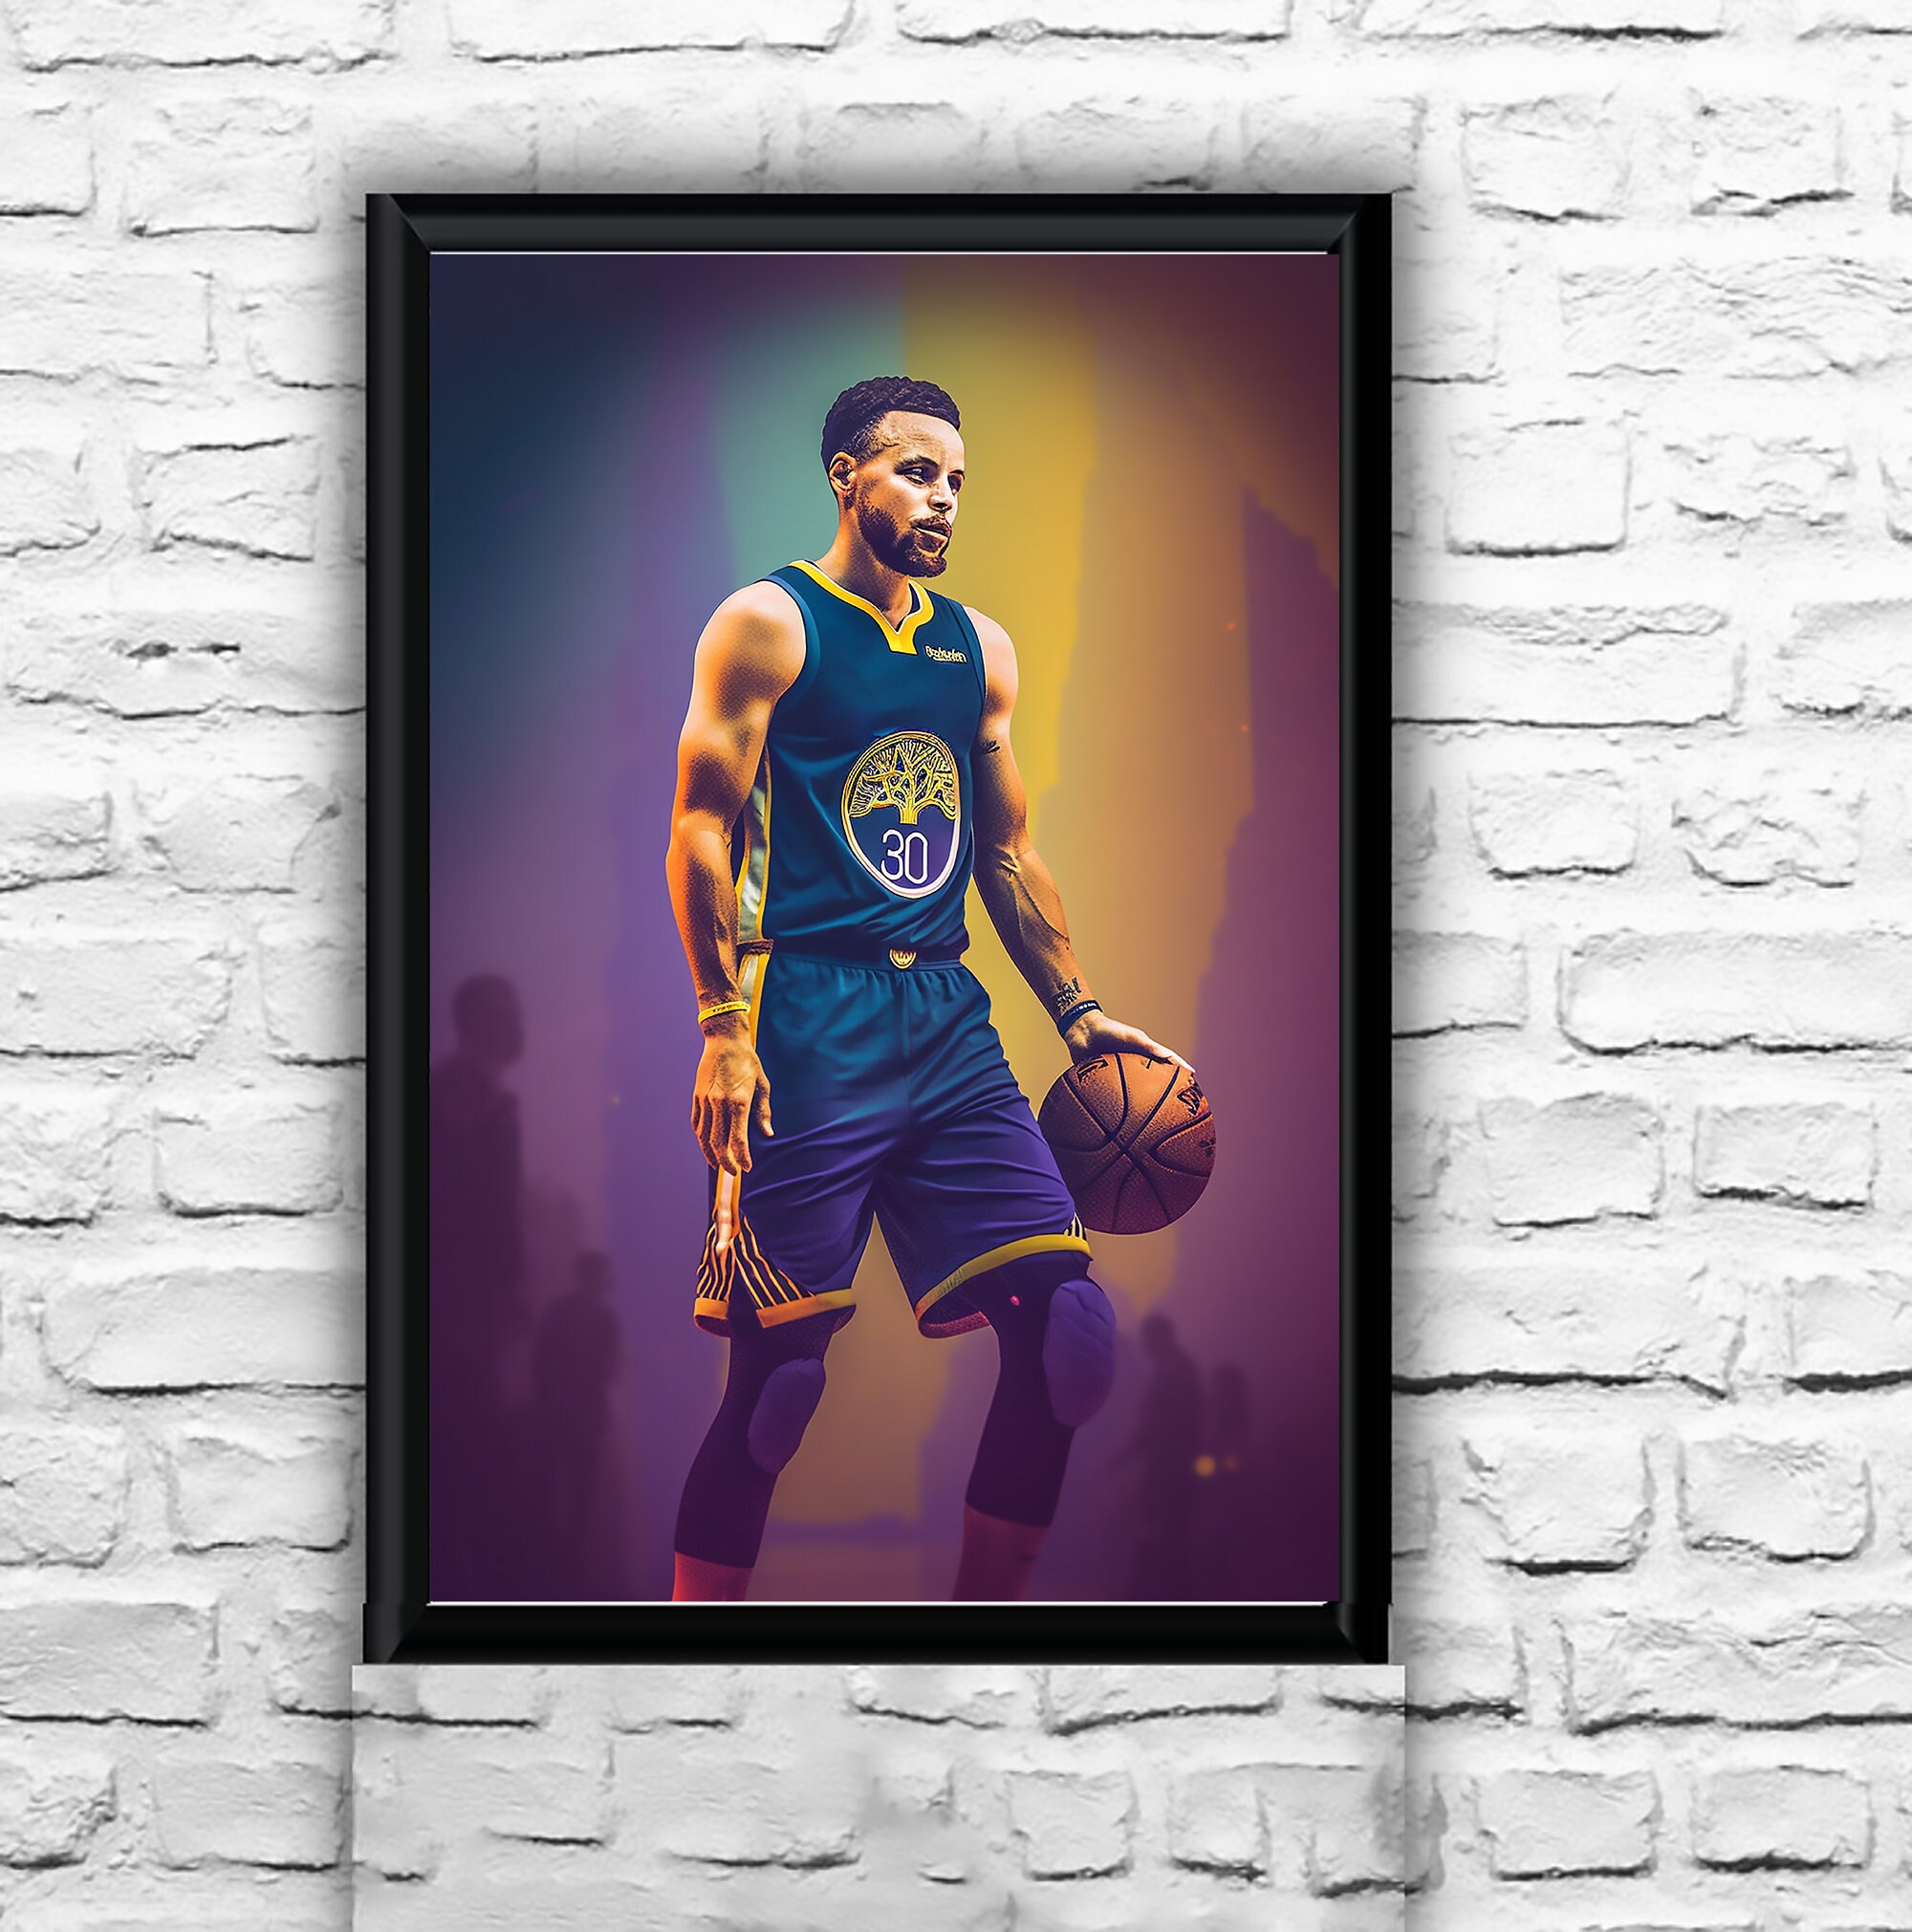  Stephen Curry Poster Canvas Wall Art Basketball Posters Bedroom  Office Wall Decor (20x30inch-No Frame,C): Posters & Prints